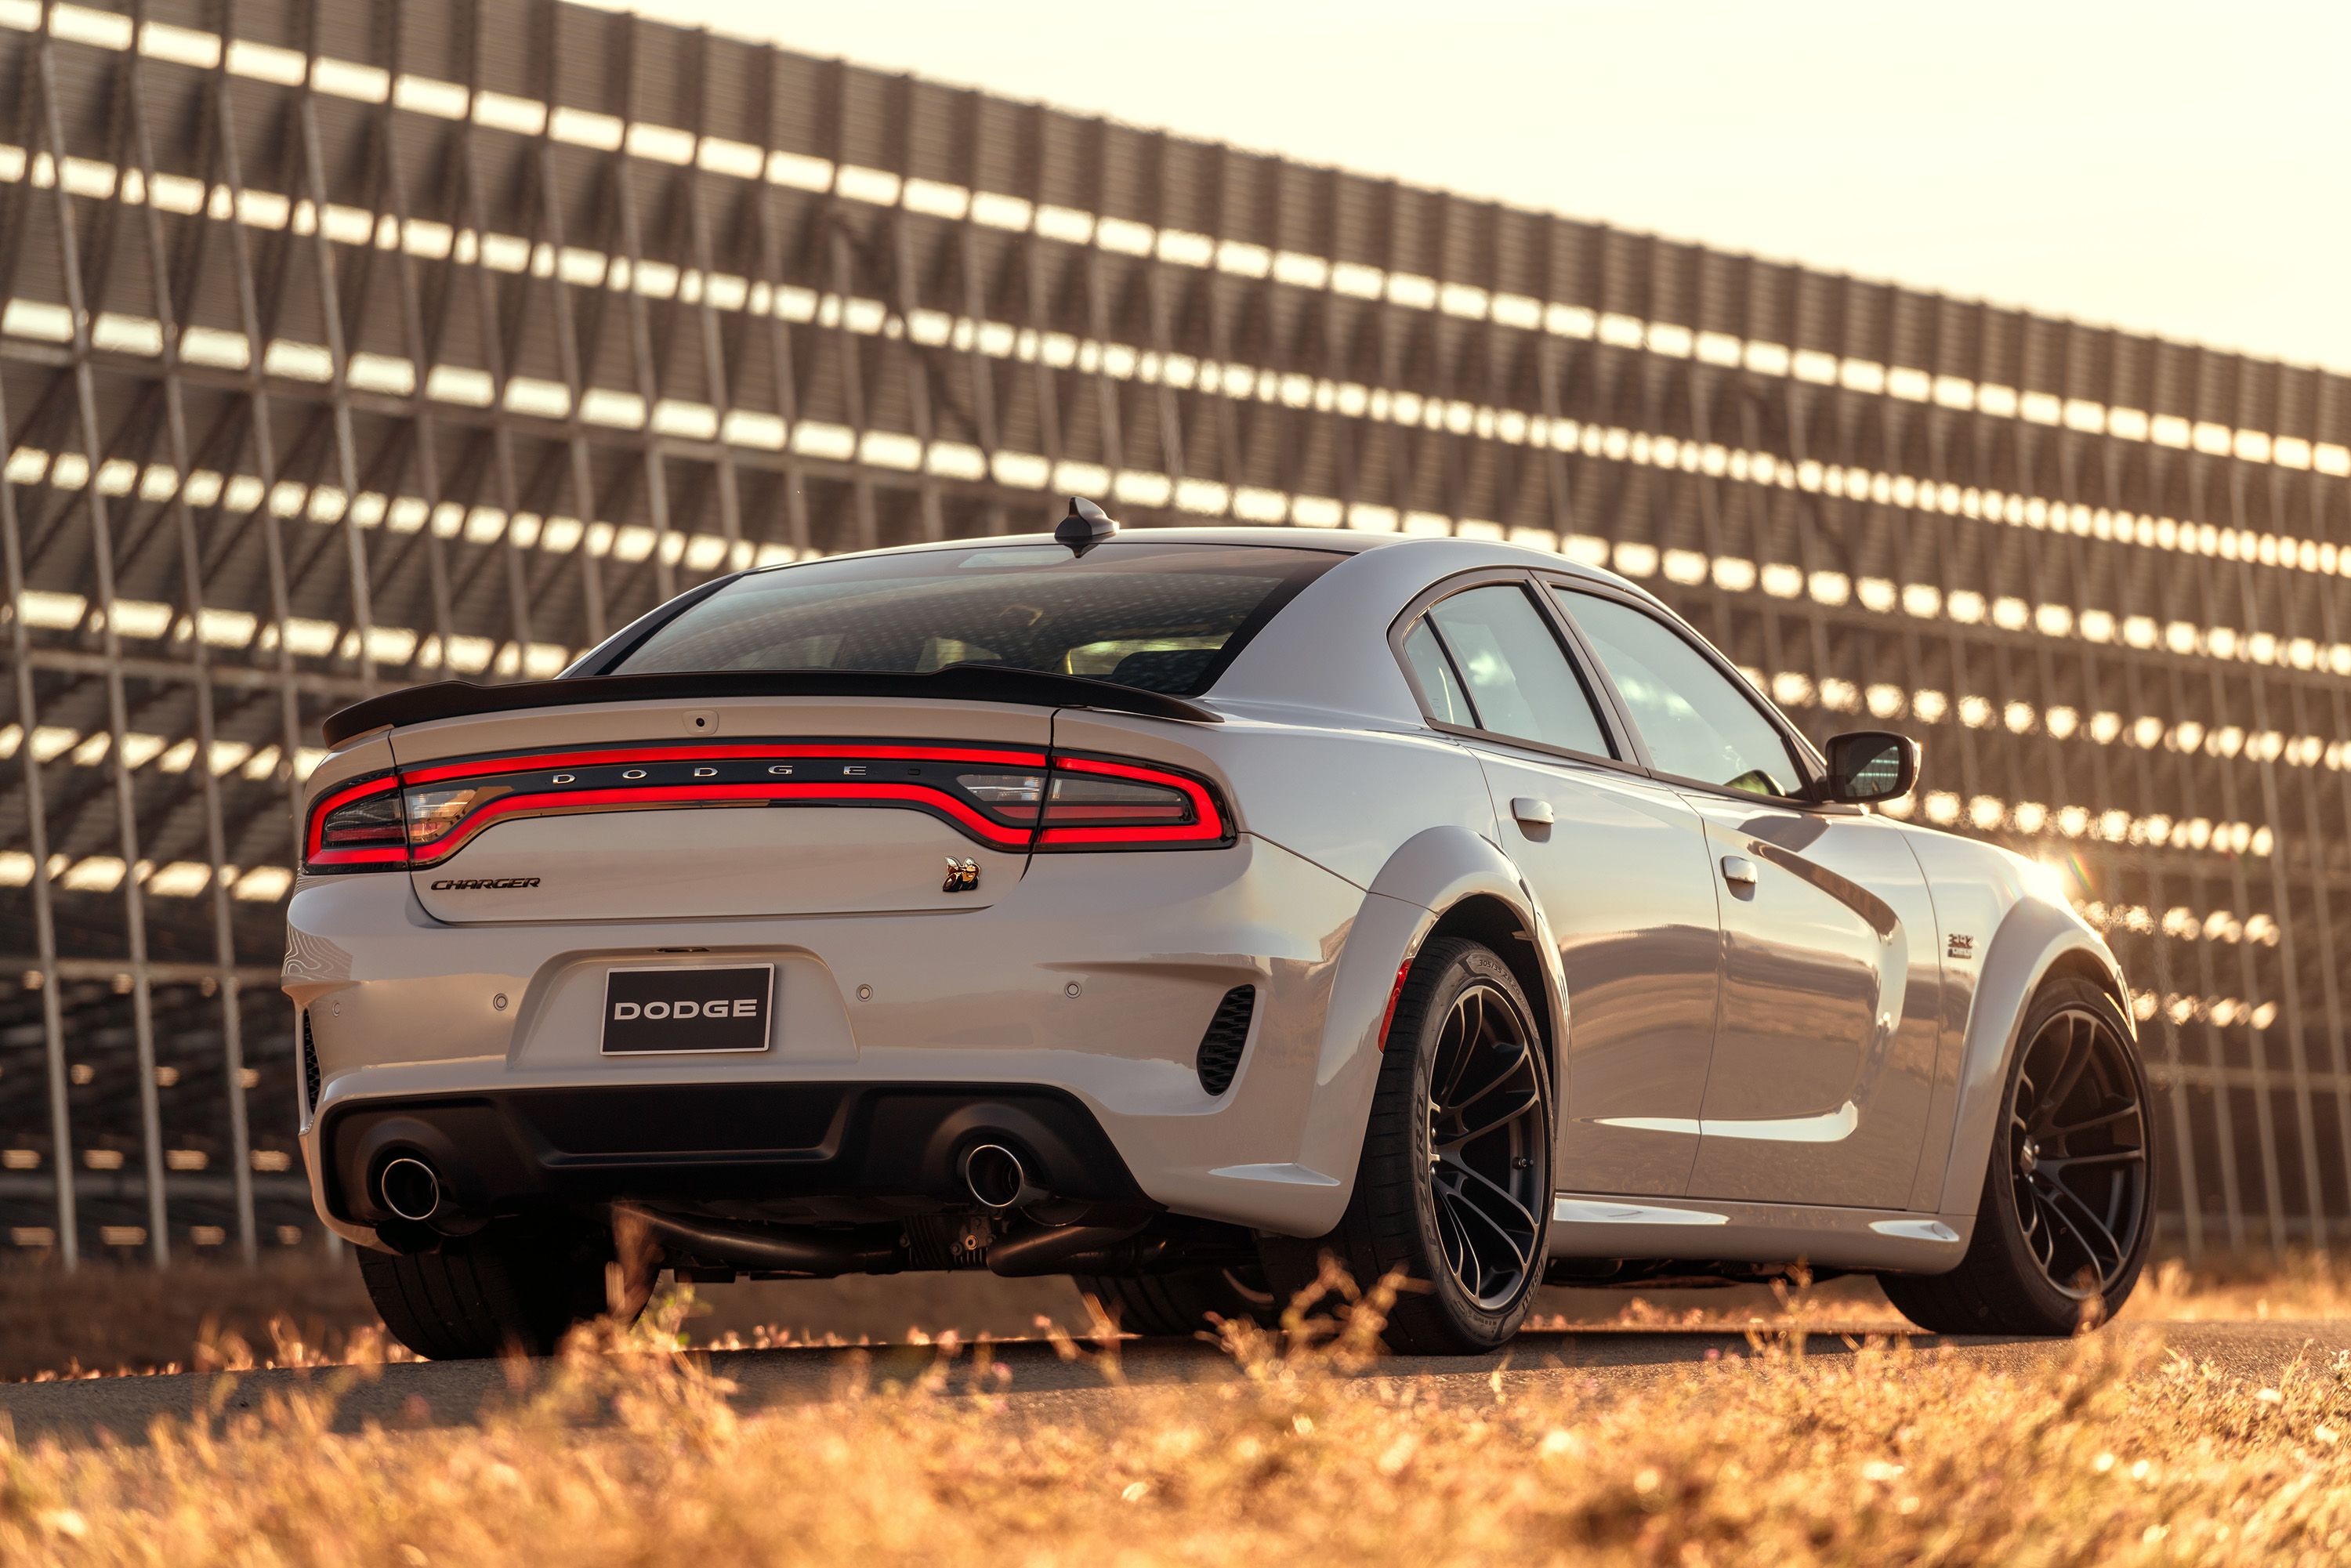 2020 Dodge Charger Specs, Price, MPG & Reviews